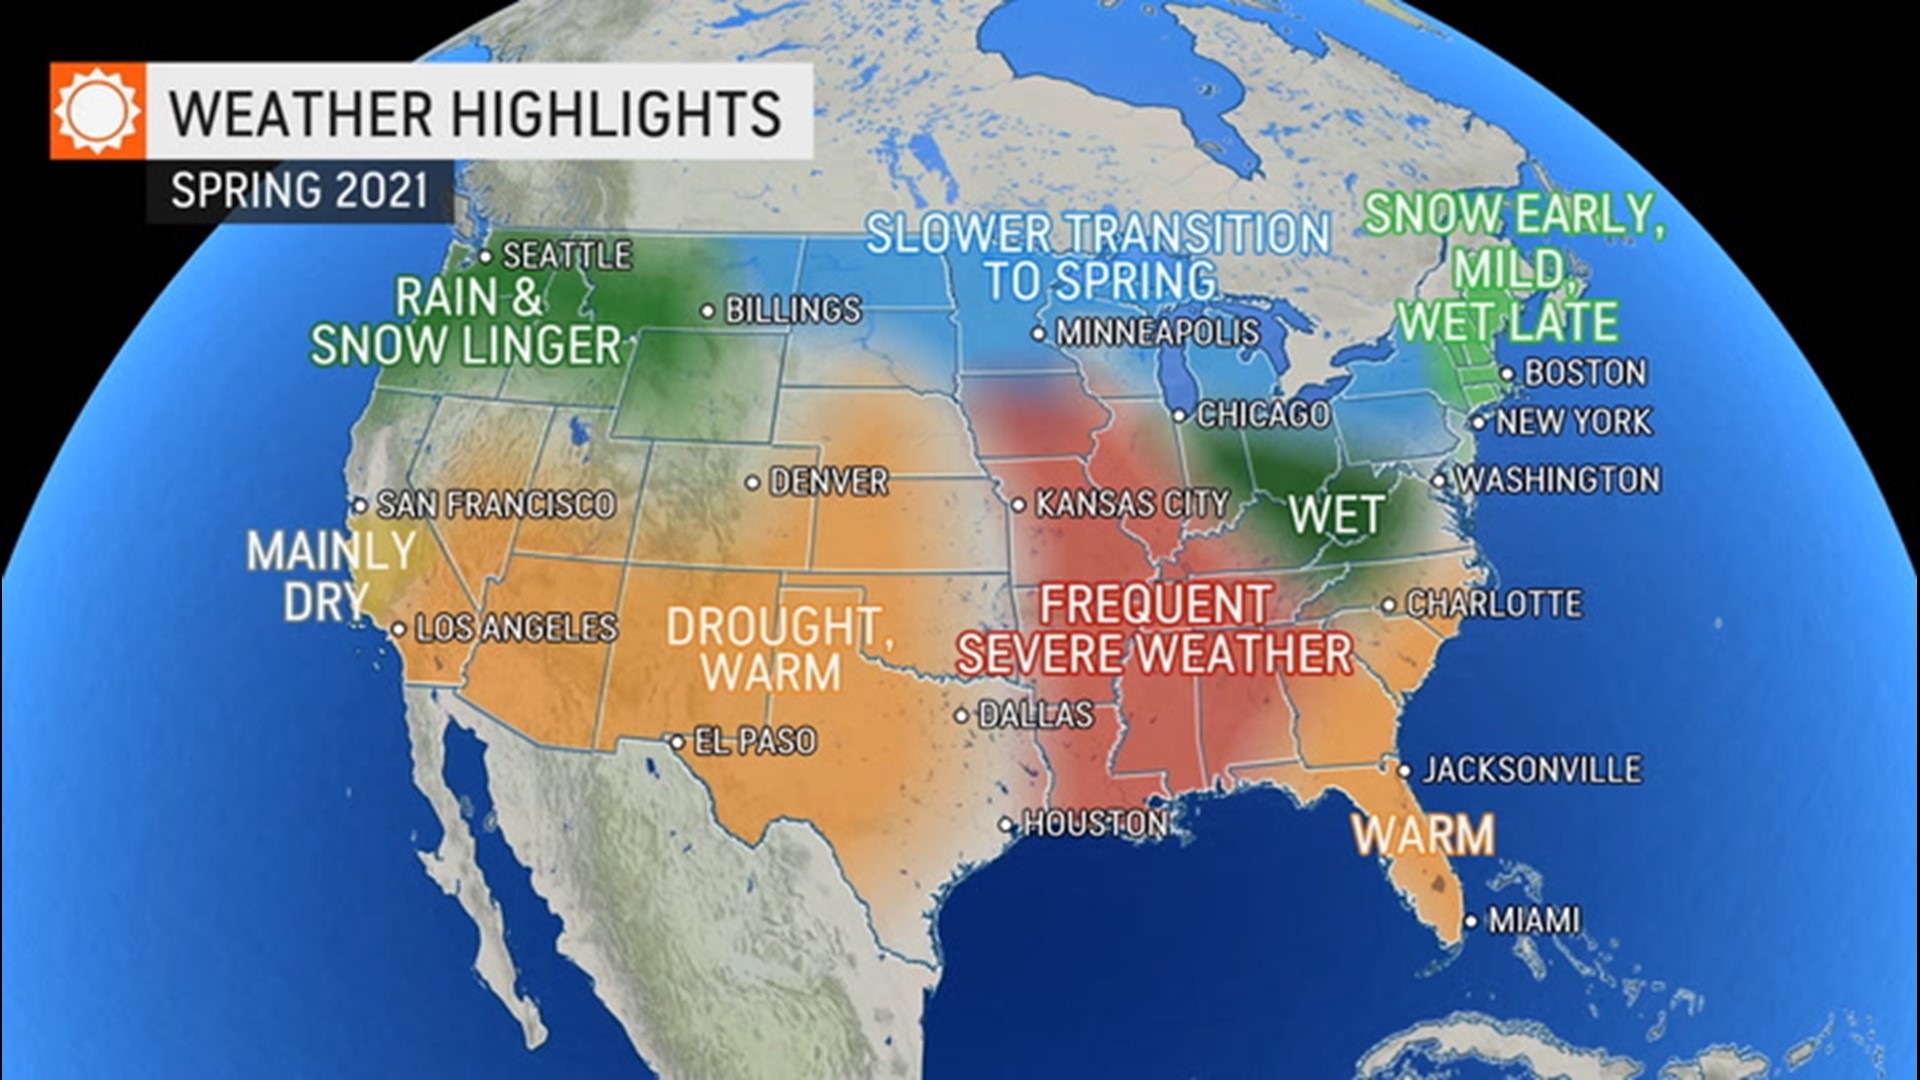 Texas Weather Forecast For January 2020 - TXASCE